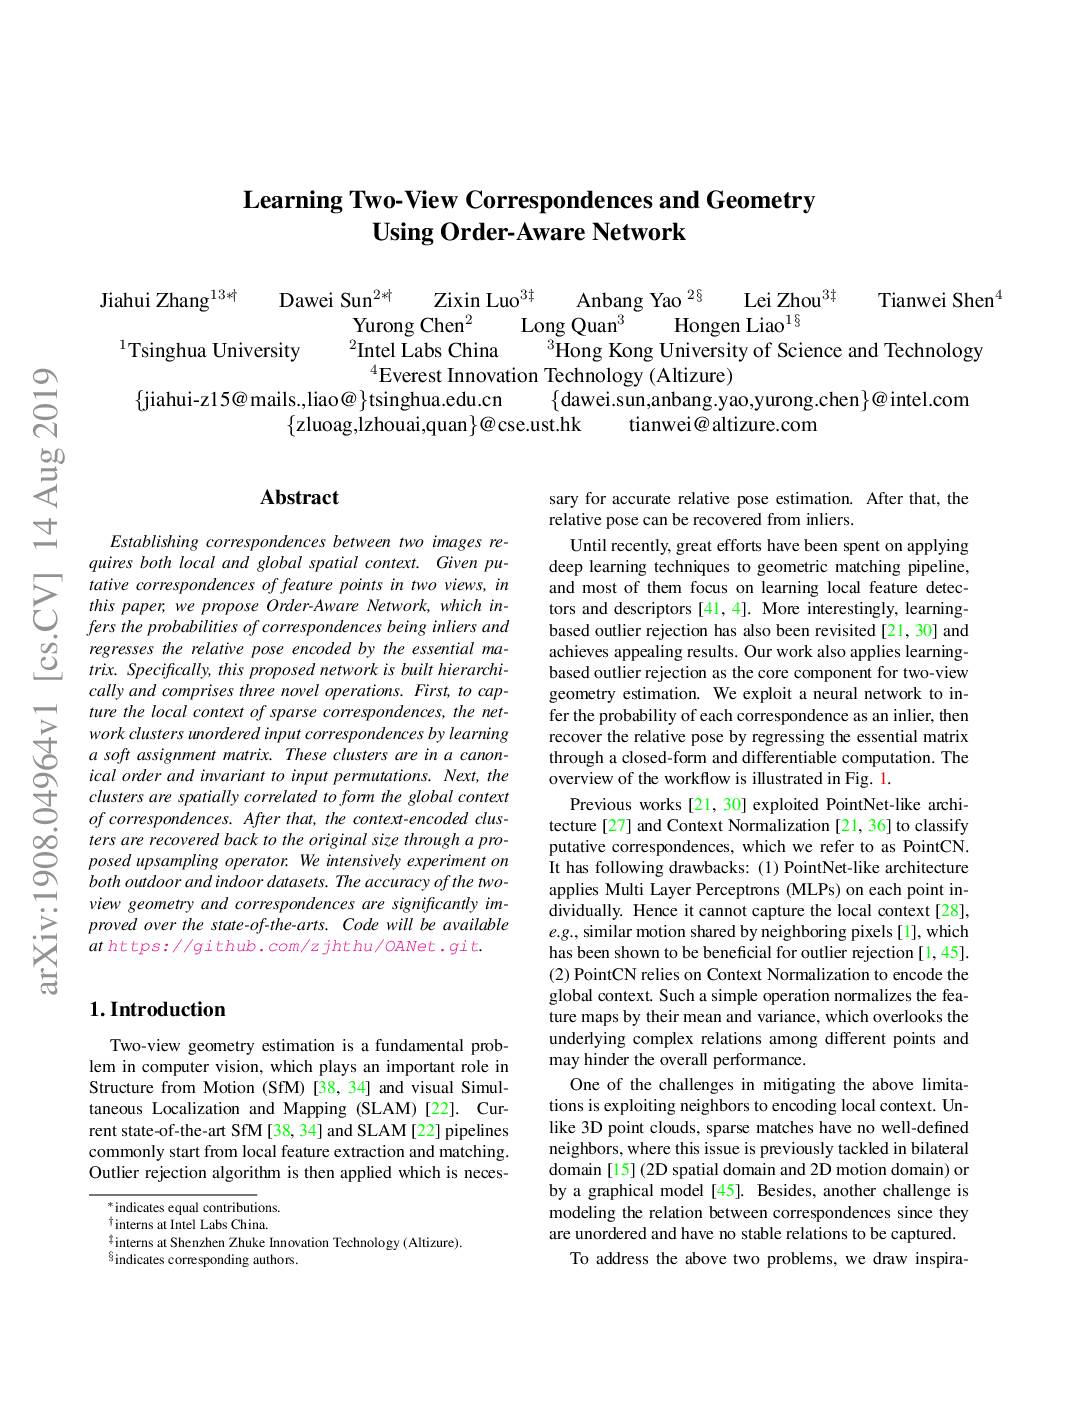 Learning Two-View Correspondences and Geometry Using Order-Aware Network